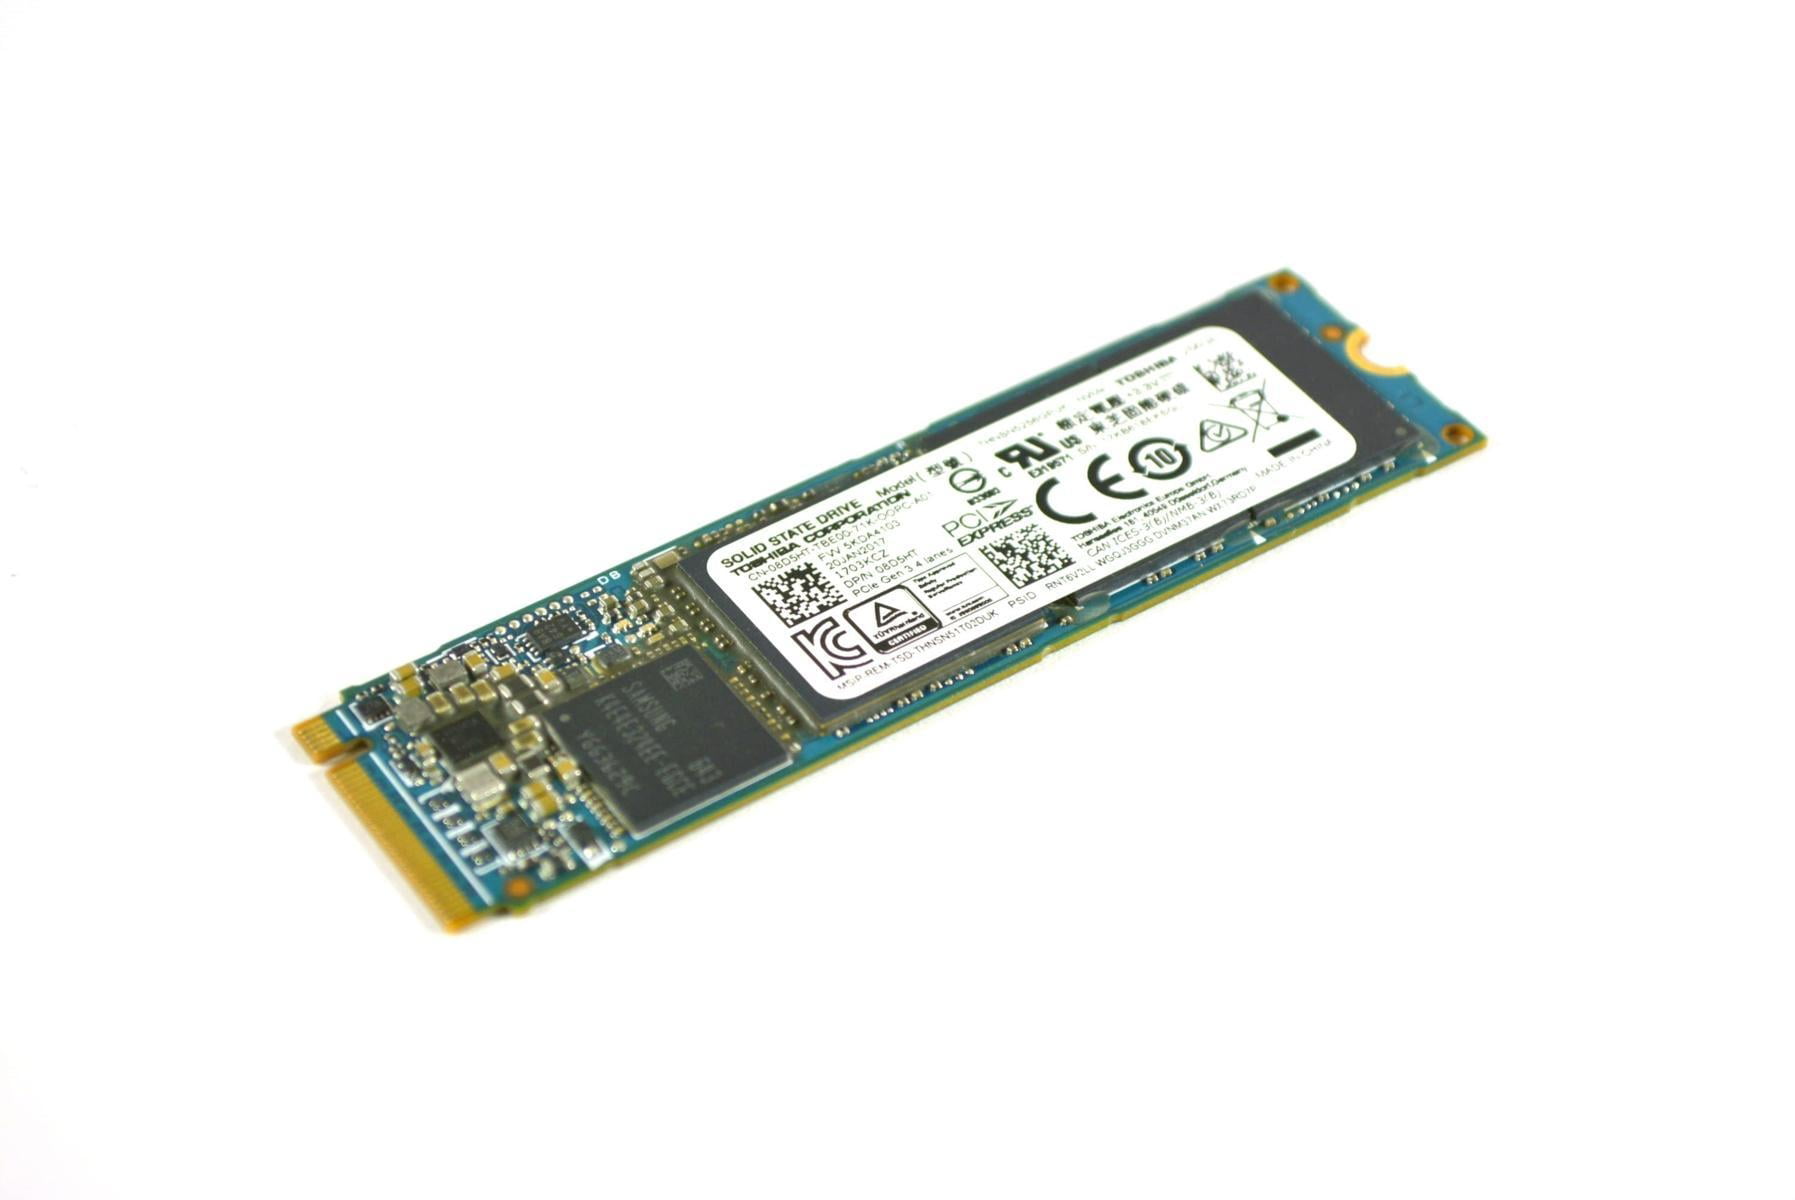 Toshiba THNSN5256GPUK 256GB SSD M.2 2280 NVMe PCIe Solid State 8D5HT Used